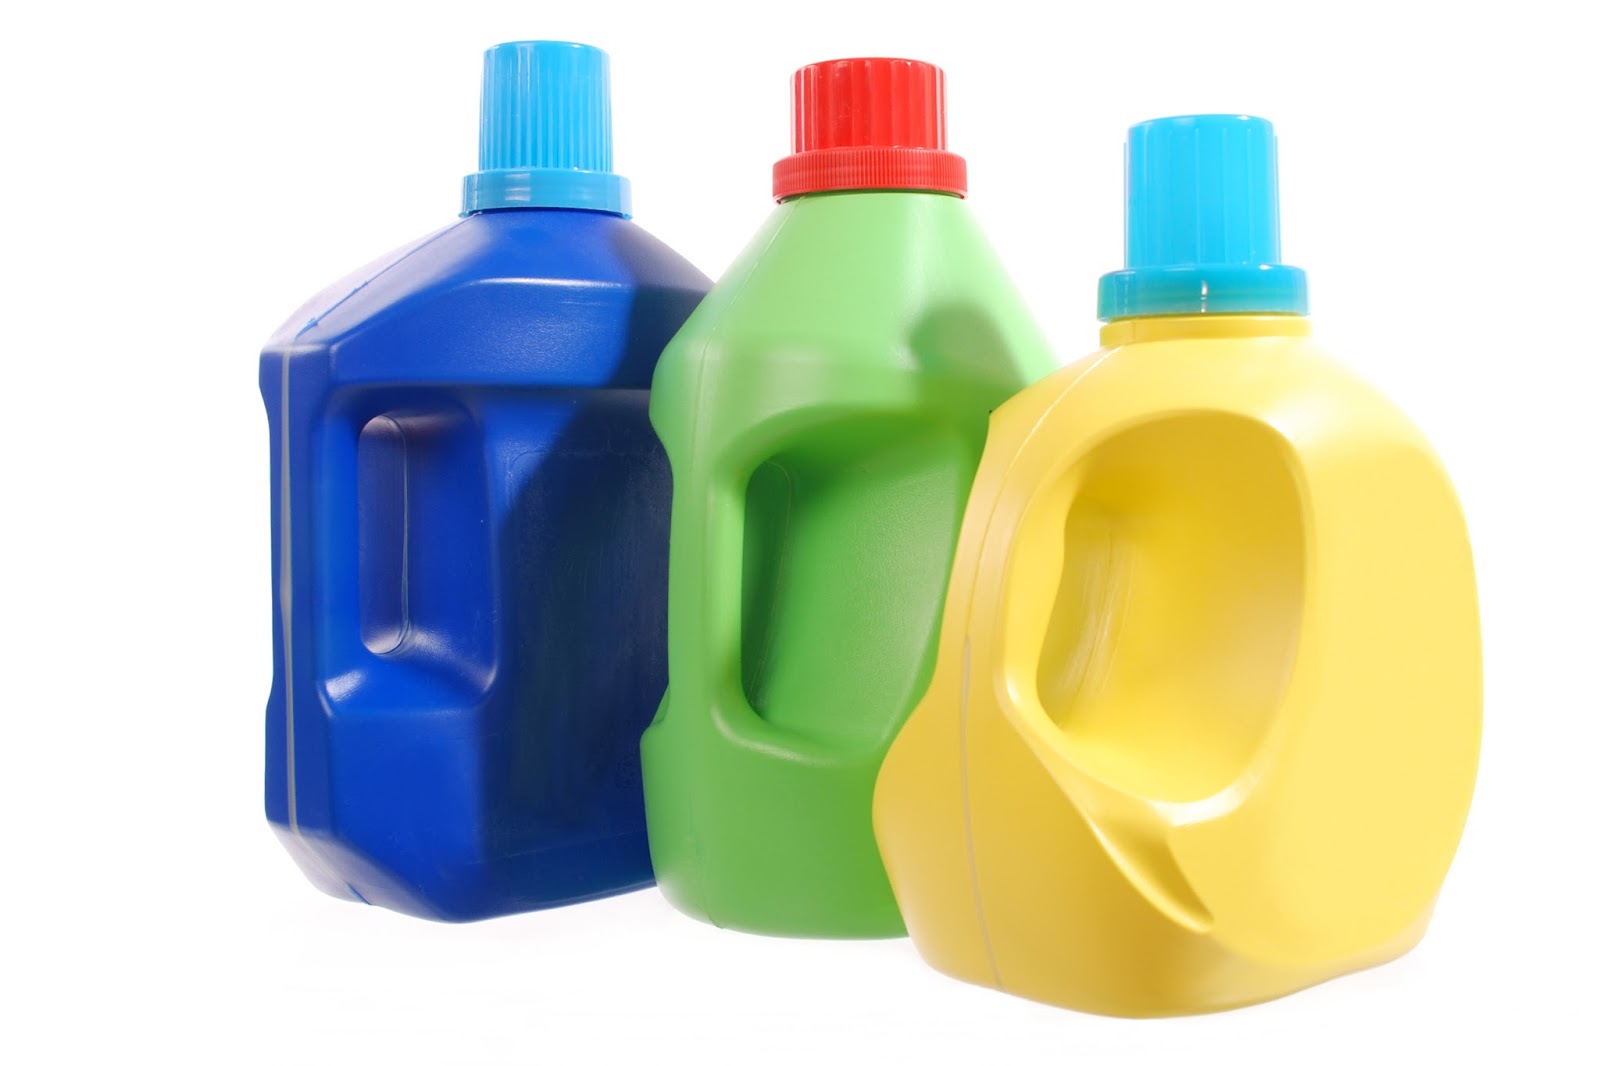 Are Plastic Laundry Detergent Bottles Recyclable?